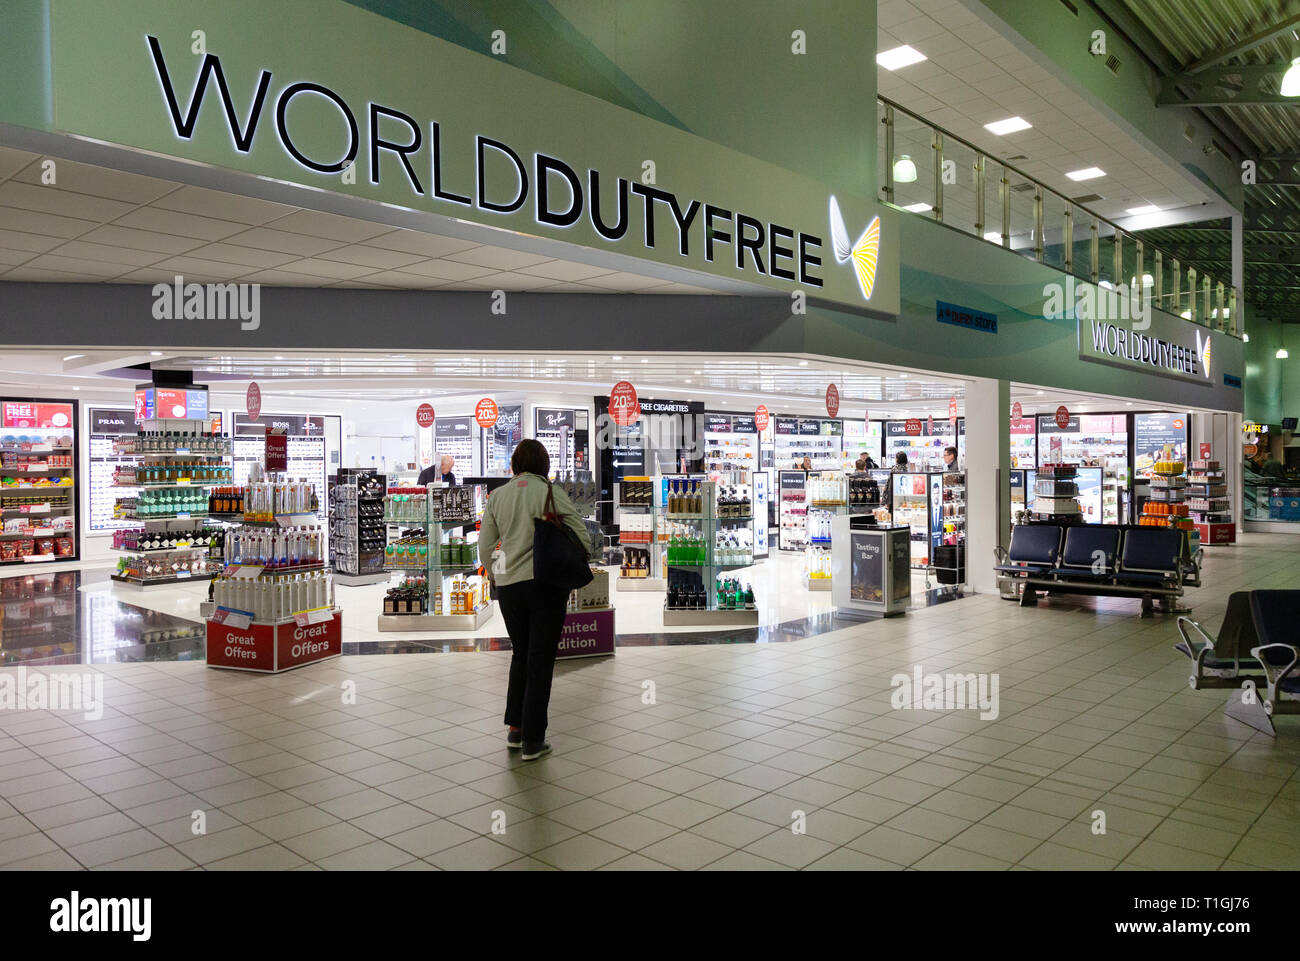 World Duty Free shop - a traveller in the World Duty free shop, Departures, London Southend airport, Southend Essex UK Stock Photo